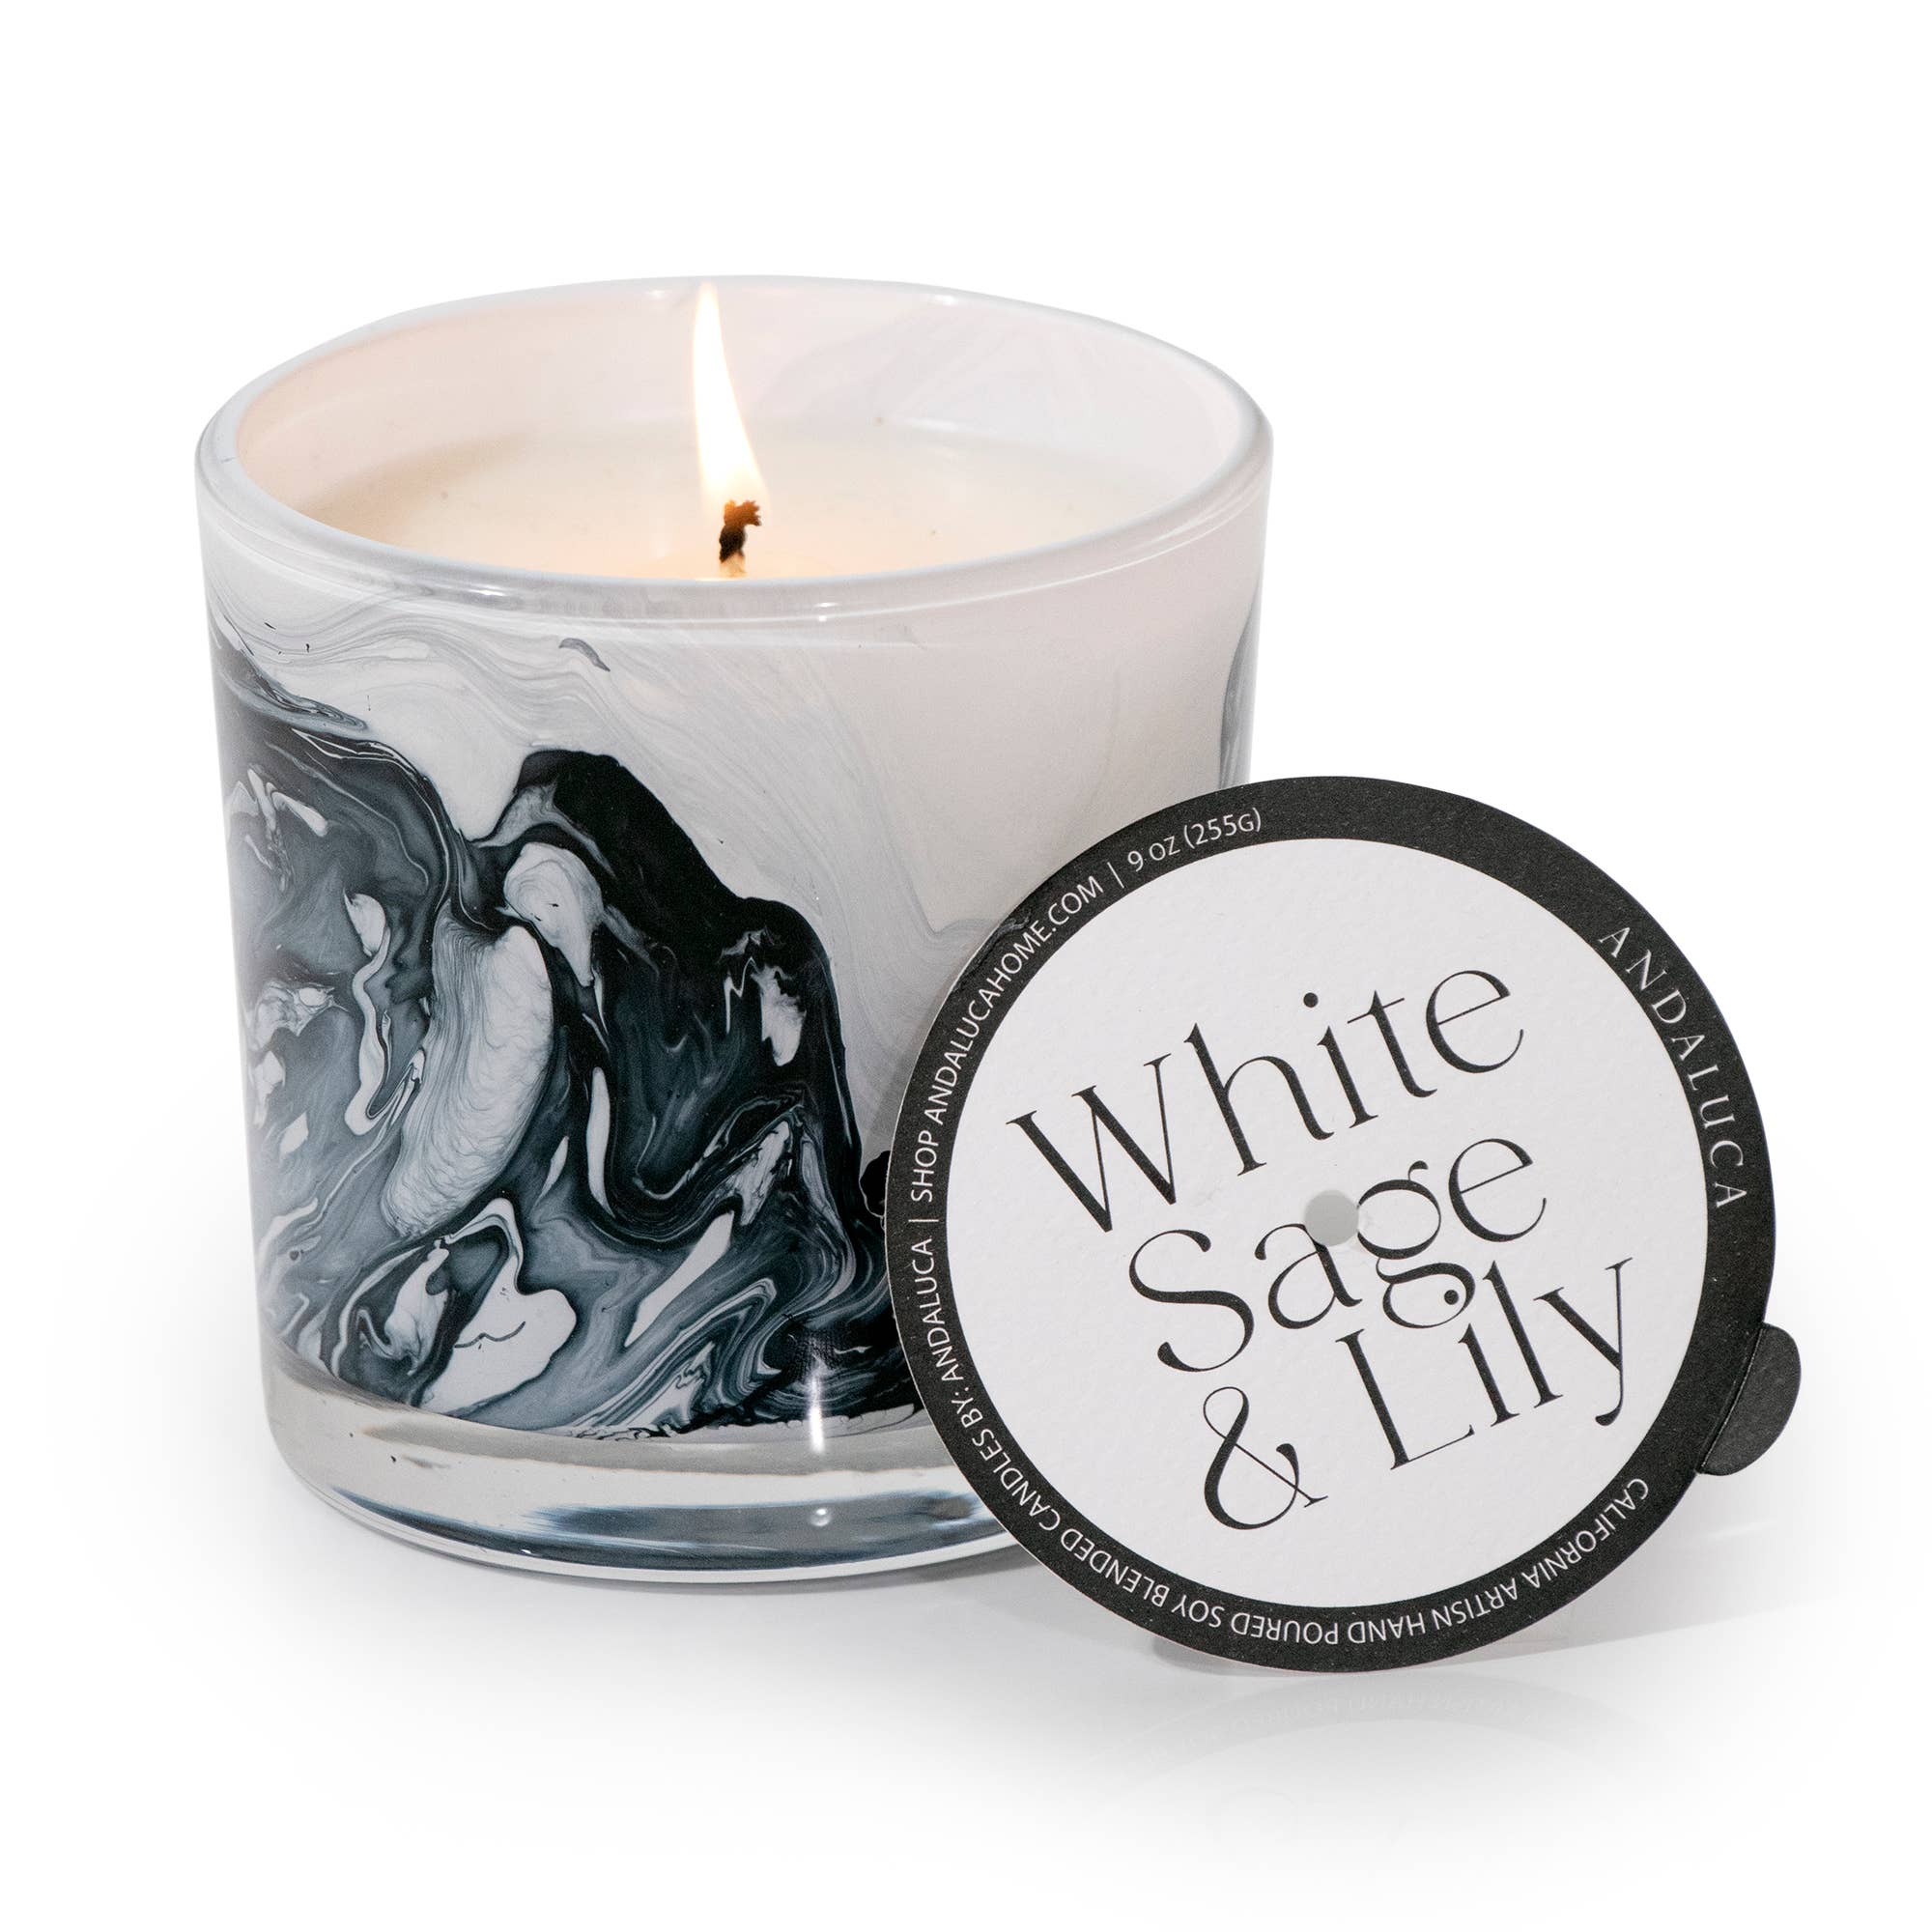 Andaluca White Sage & Lily 14 oz. Swirl Glass Candle